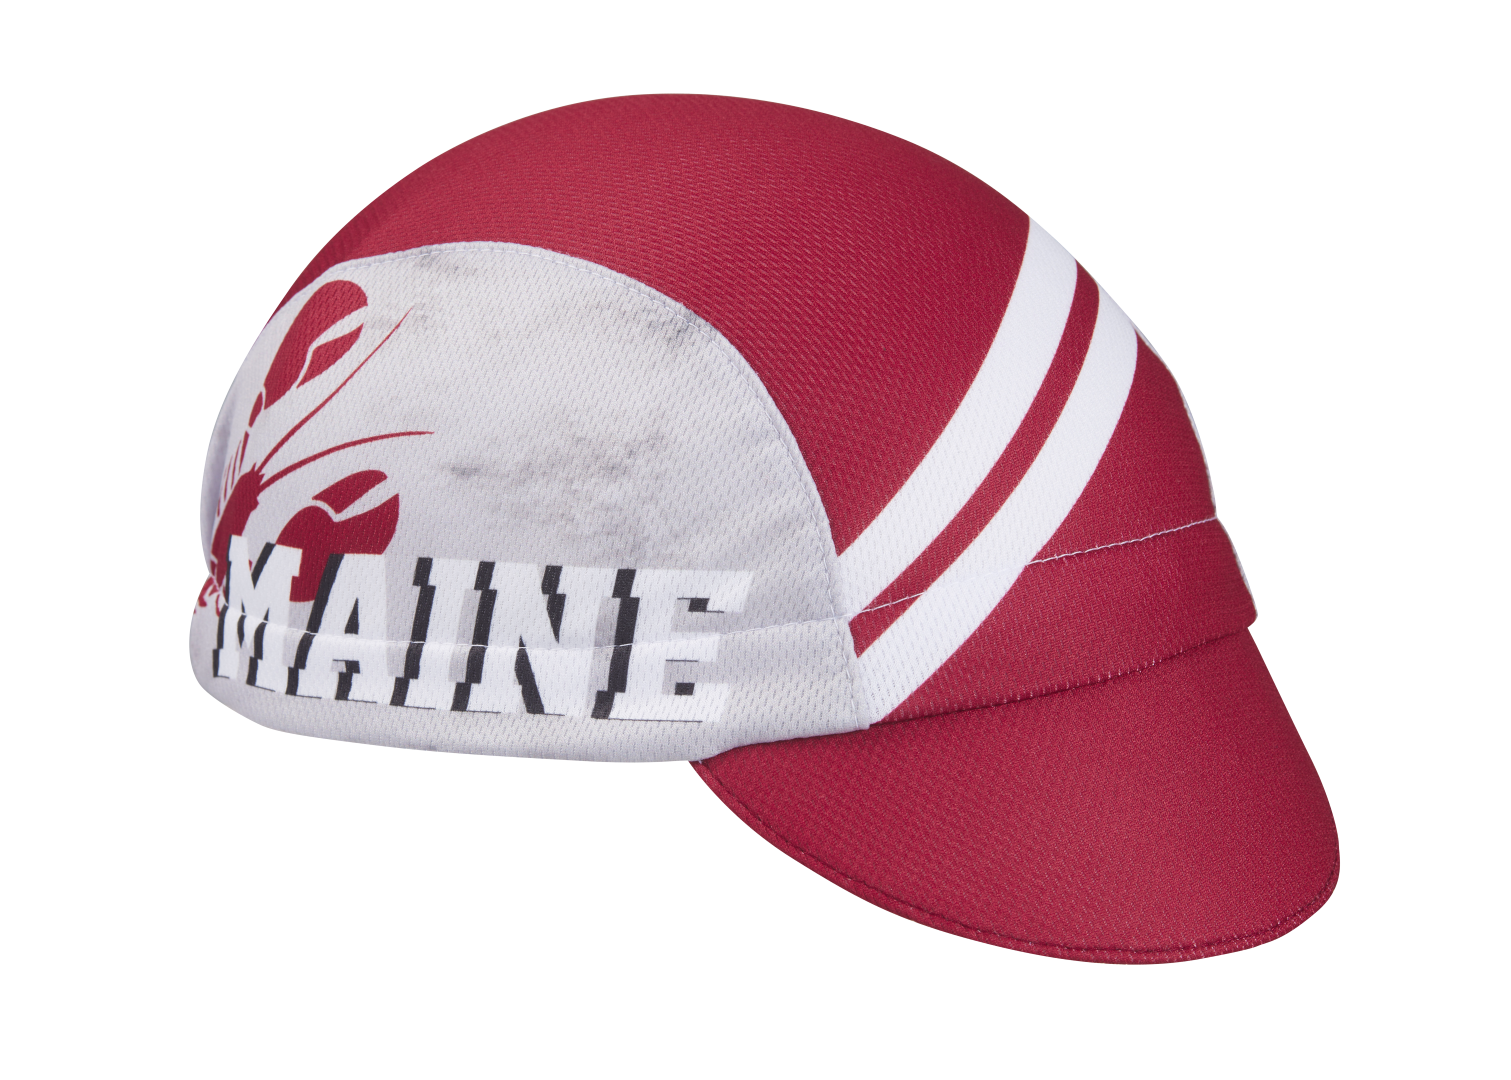 Maine Technical 3-Panel Cycling Cap.  Red cap with white stripes.  Gray side panel with lobster graphic and MAINE text.  Angled view.